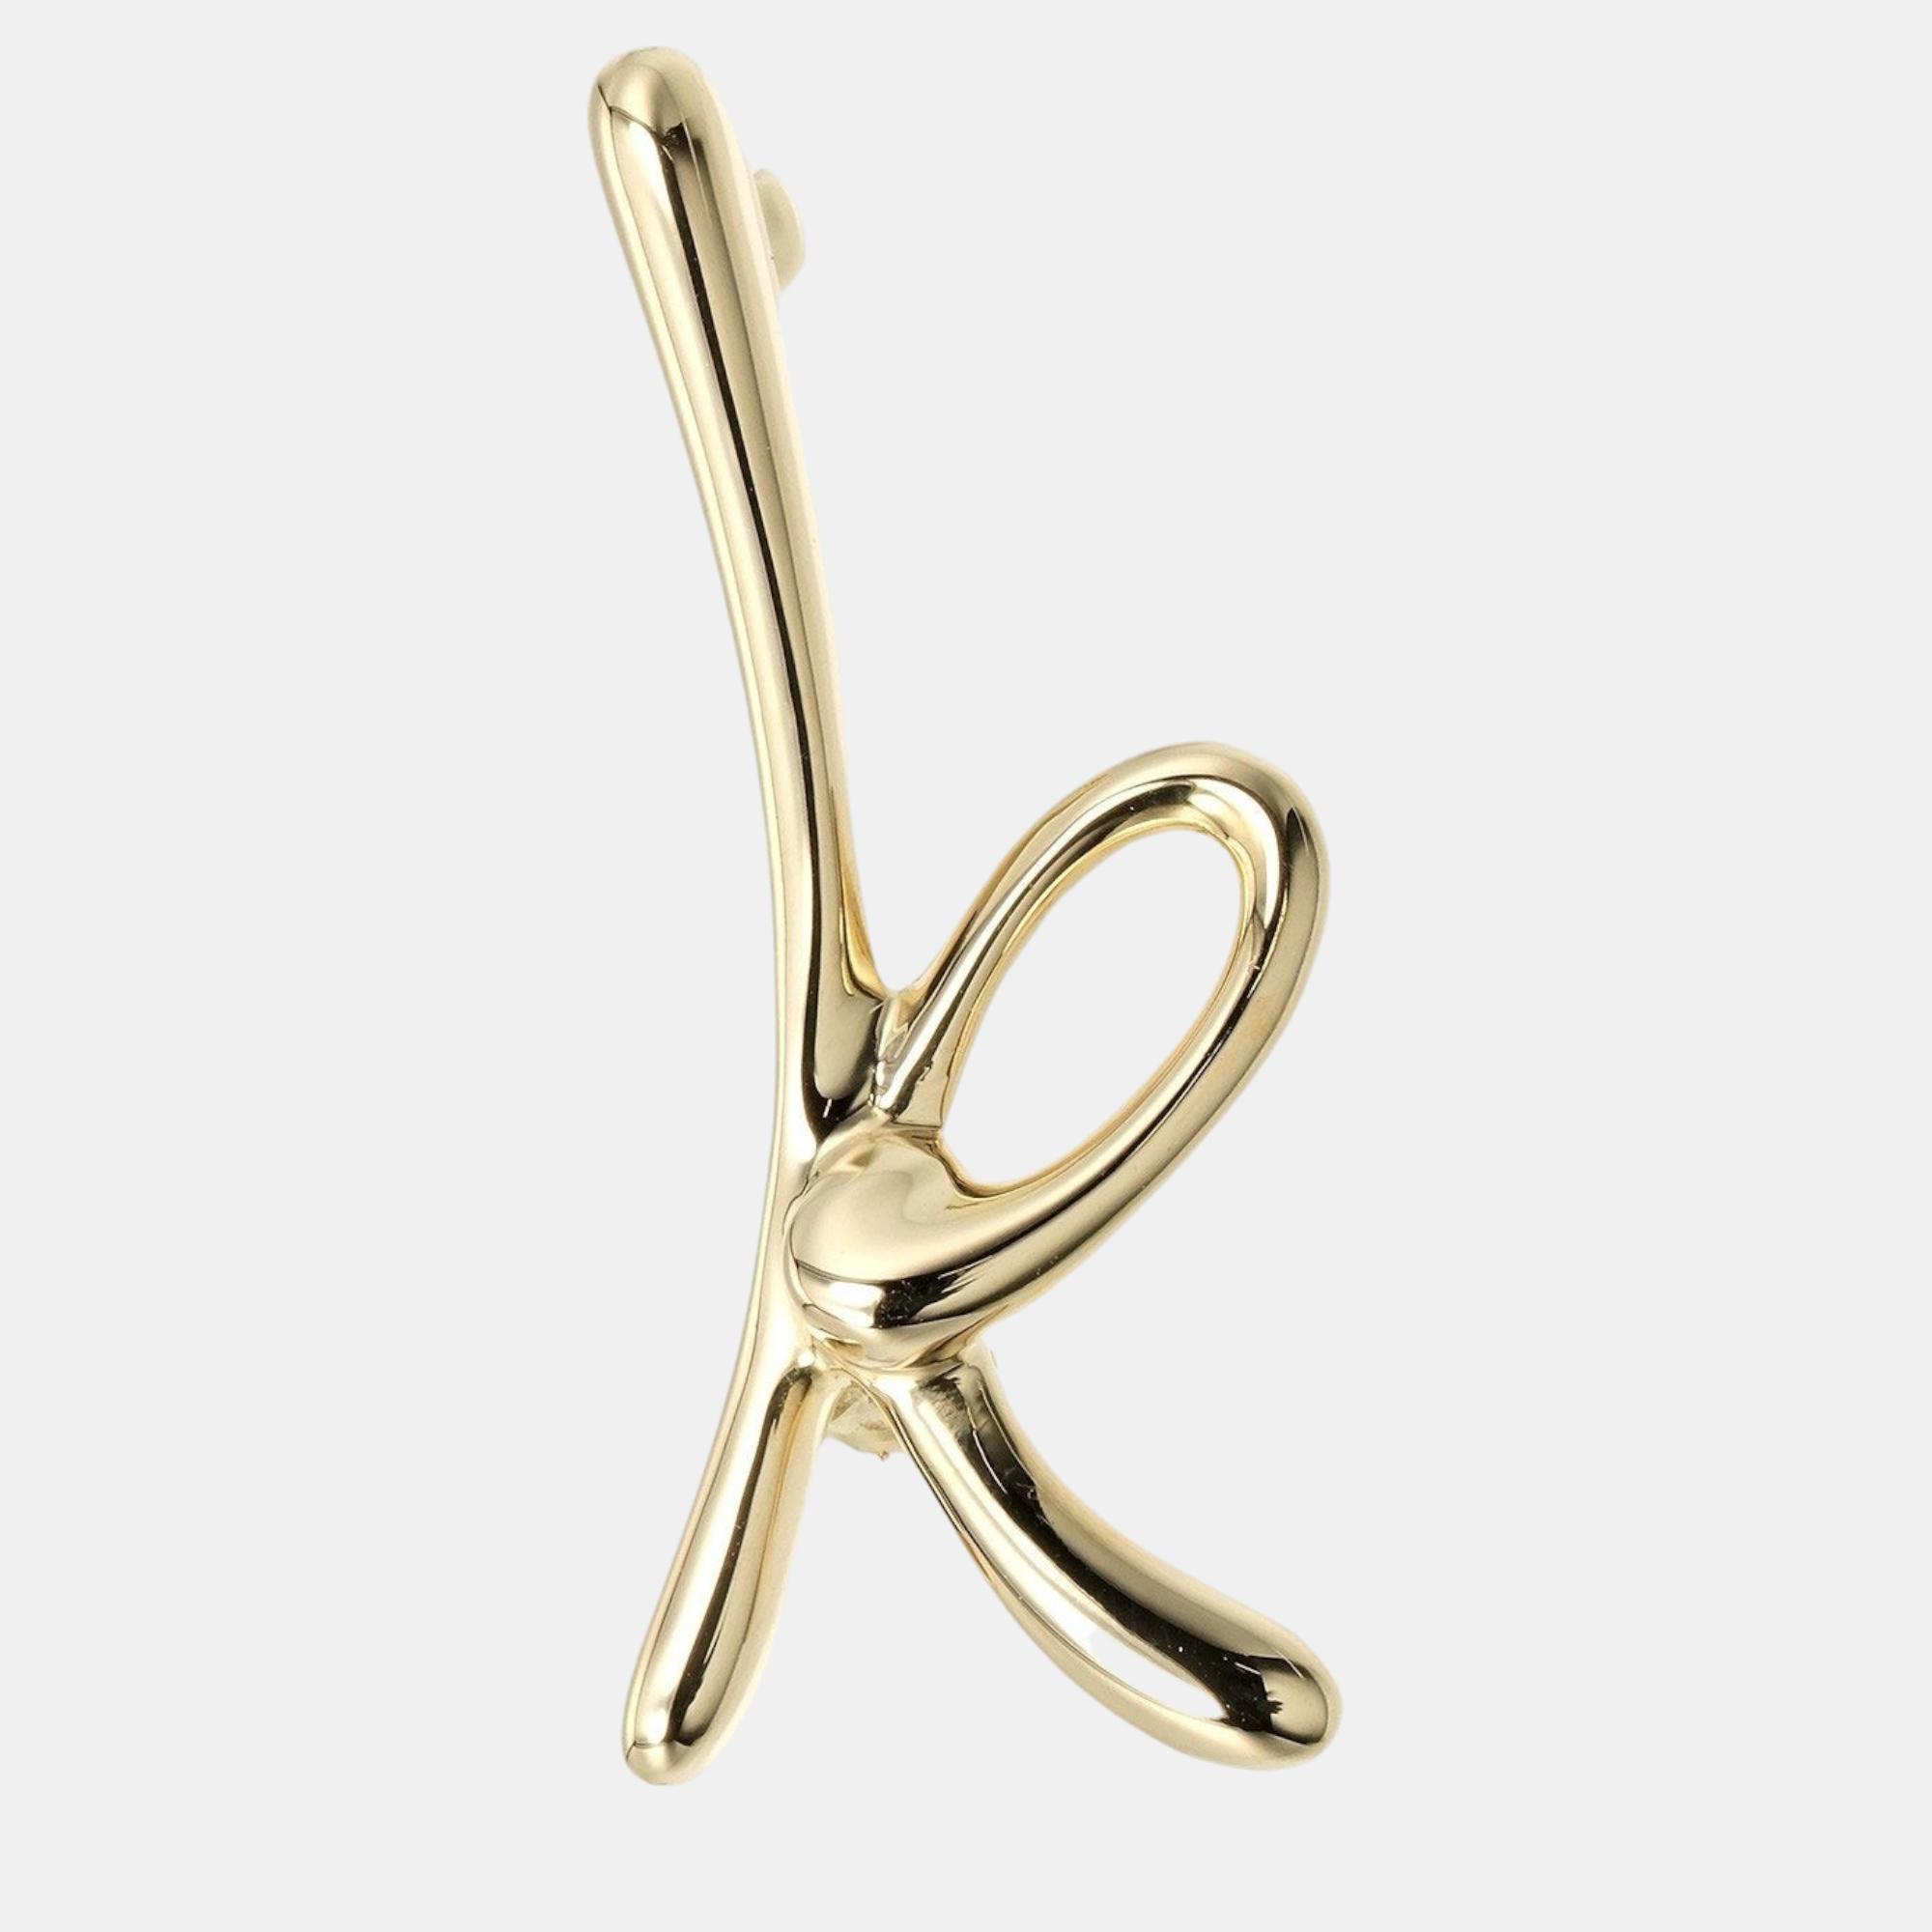 Pre-owned Tiffany & Co 18k Yellow Gold Elsa Peretti Large Alphabet Letter 'k' Brooch